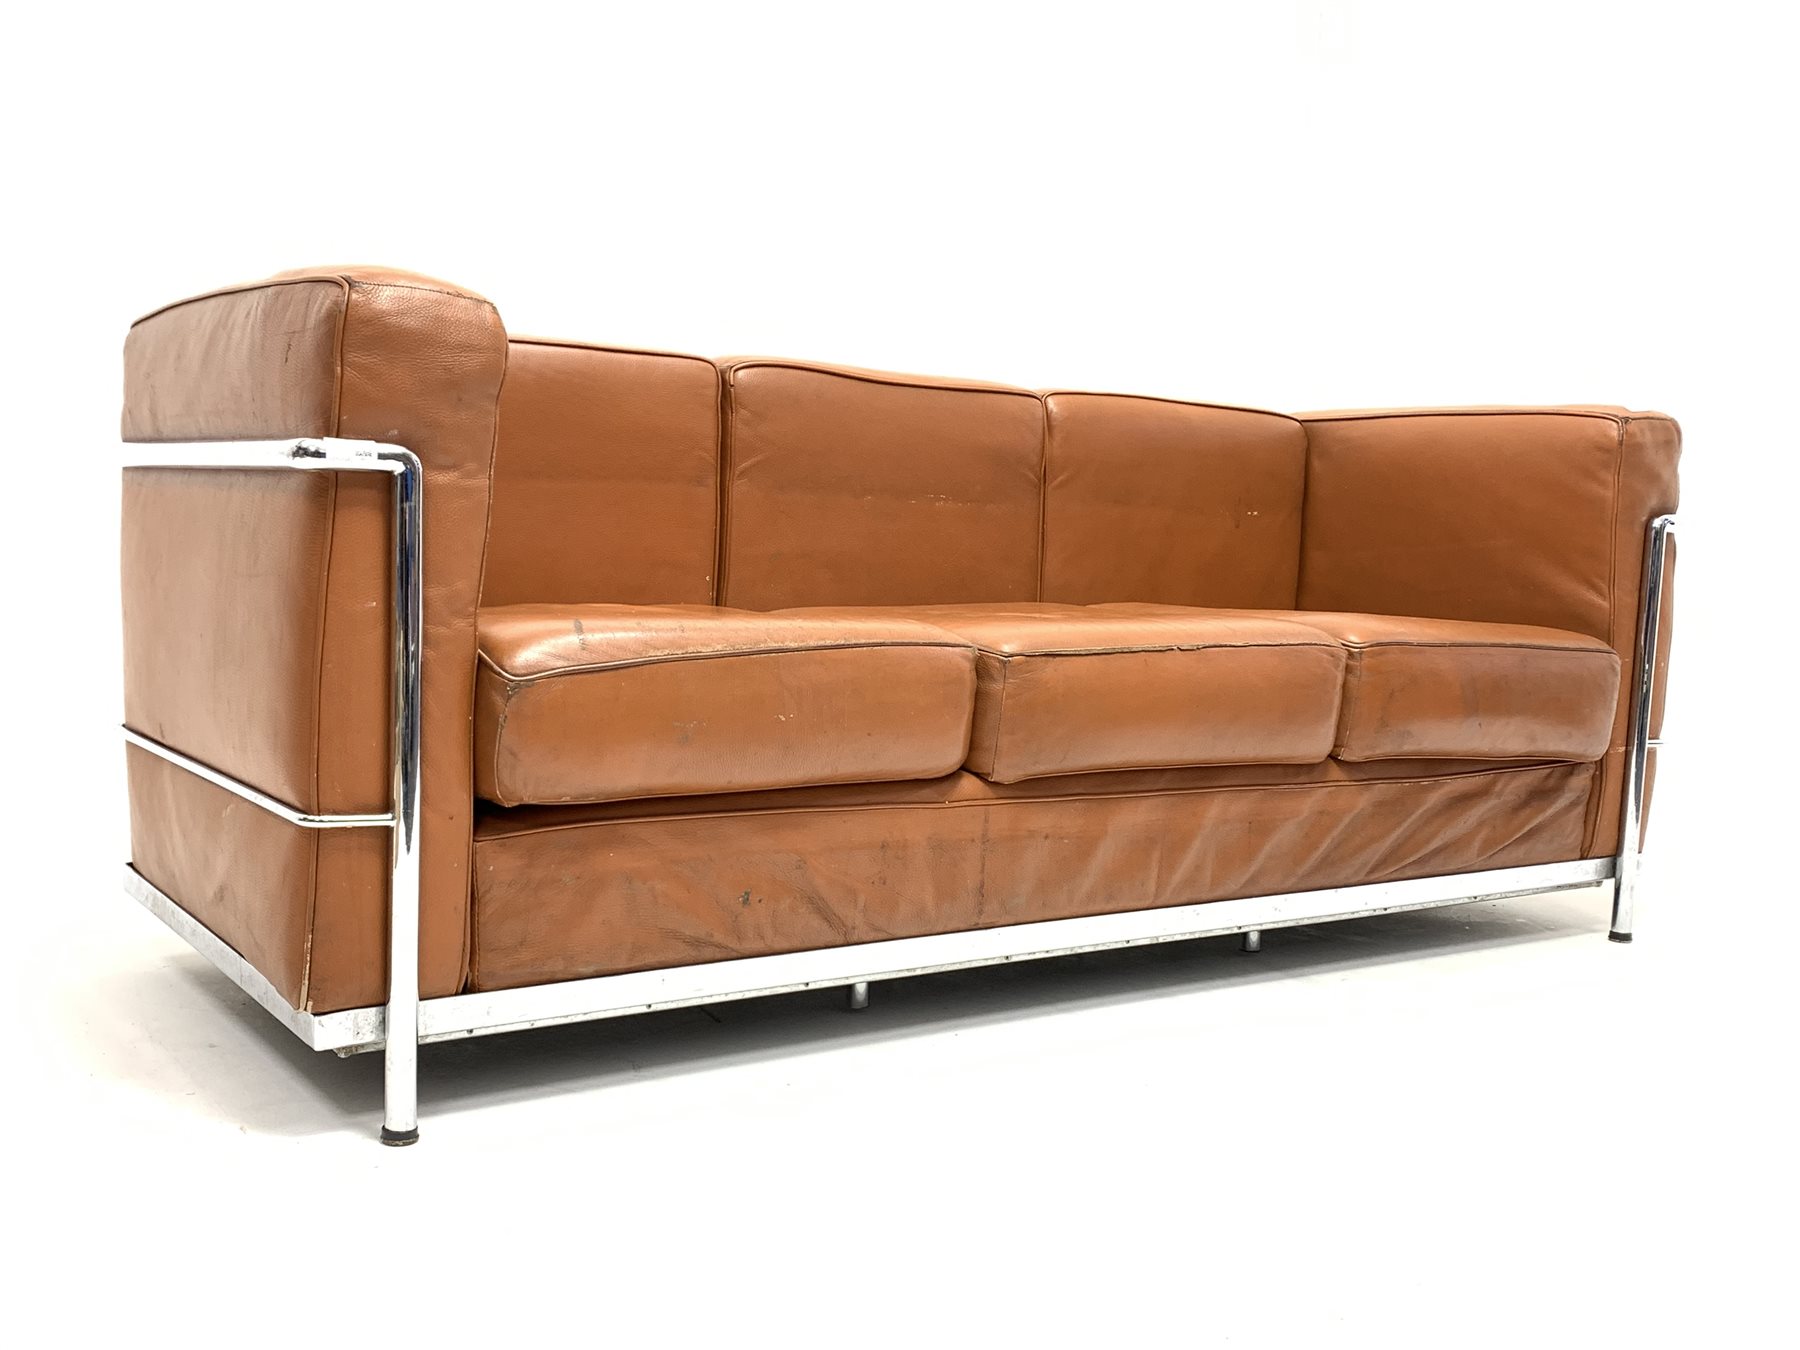 After Le Corbusier - Mid 20th century three seat sofa with chrome frame and brown leather upholstere - Image 2 of 4